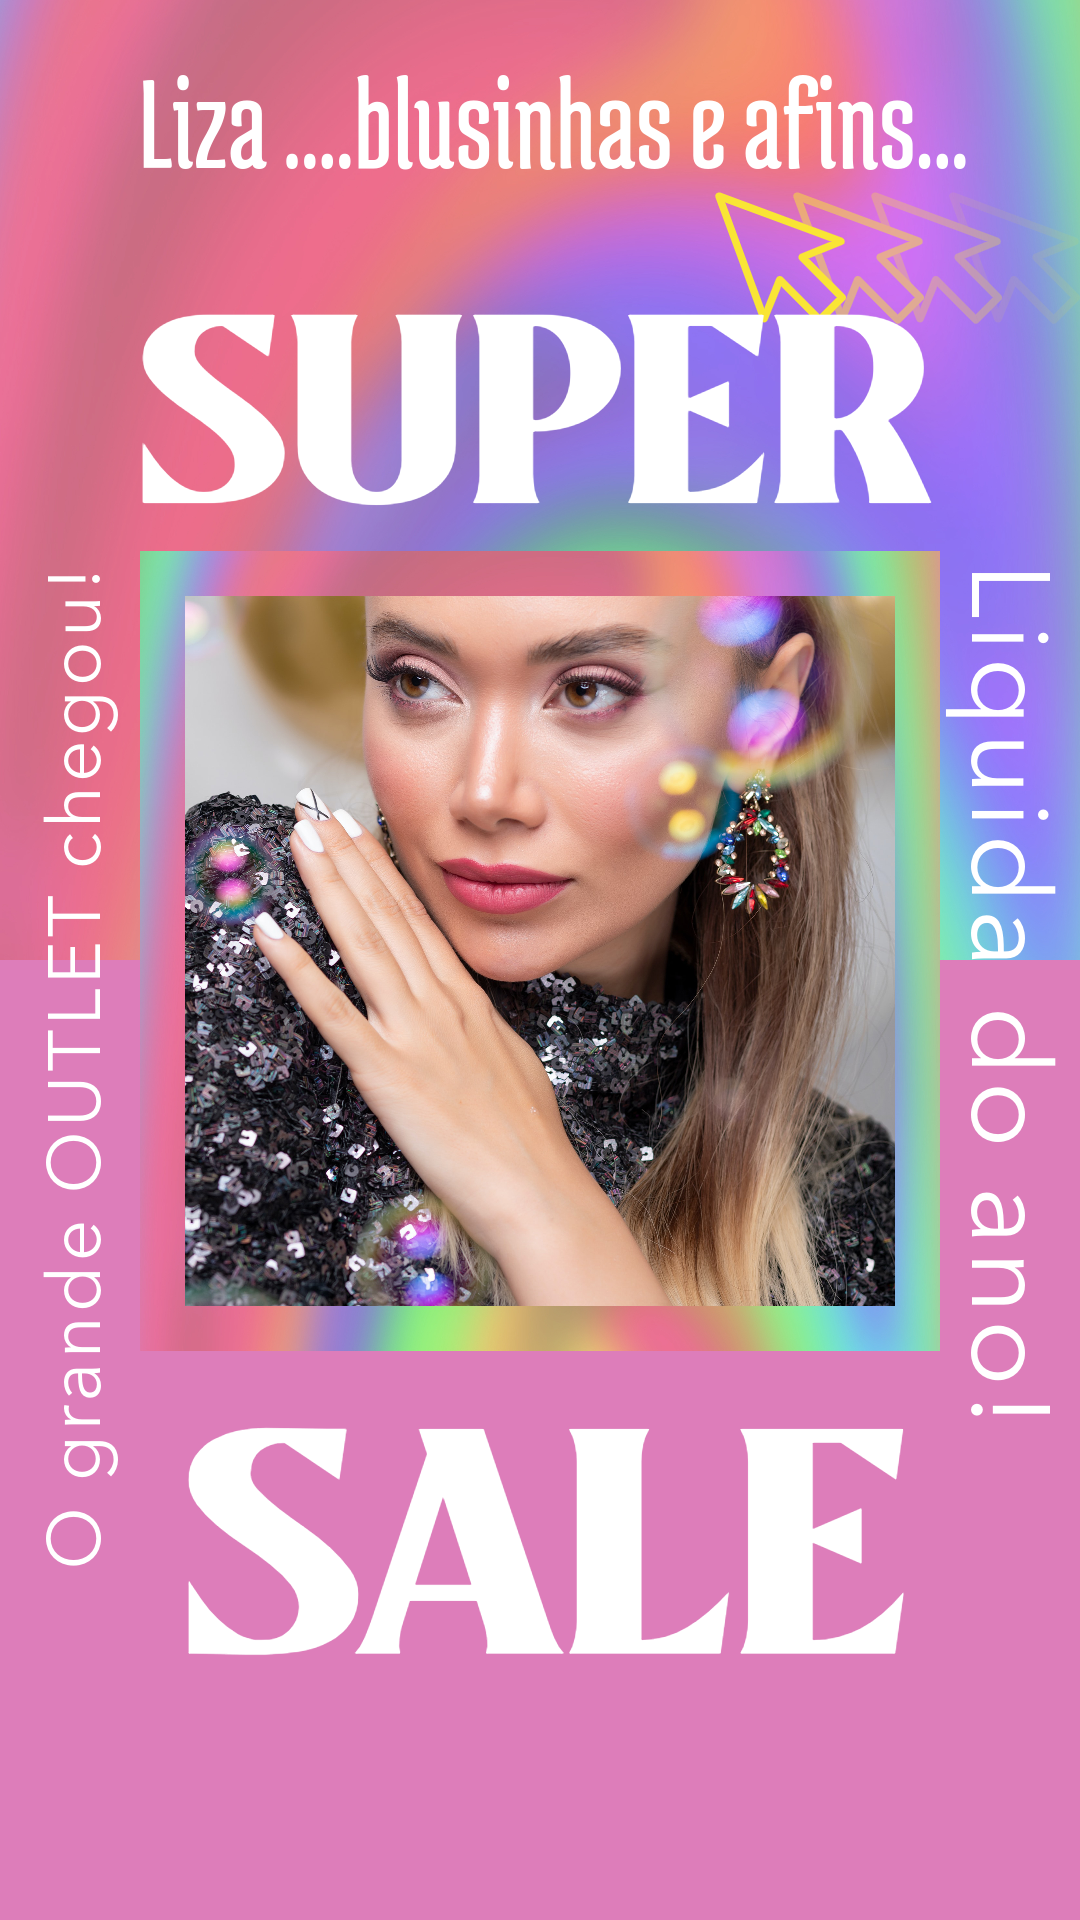 instagram-story-design-maker-for-a-fashion-special-sale-featuring-a-holographic-frame-3631d